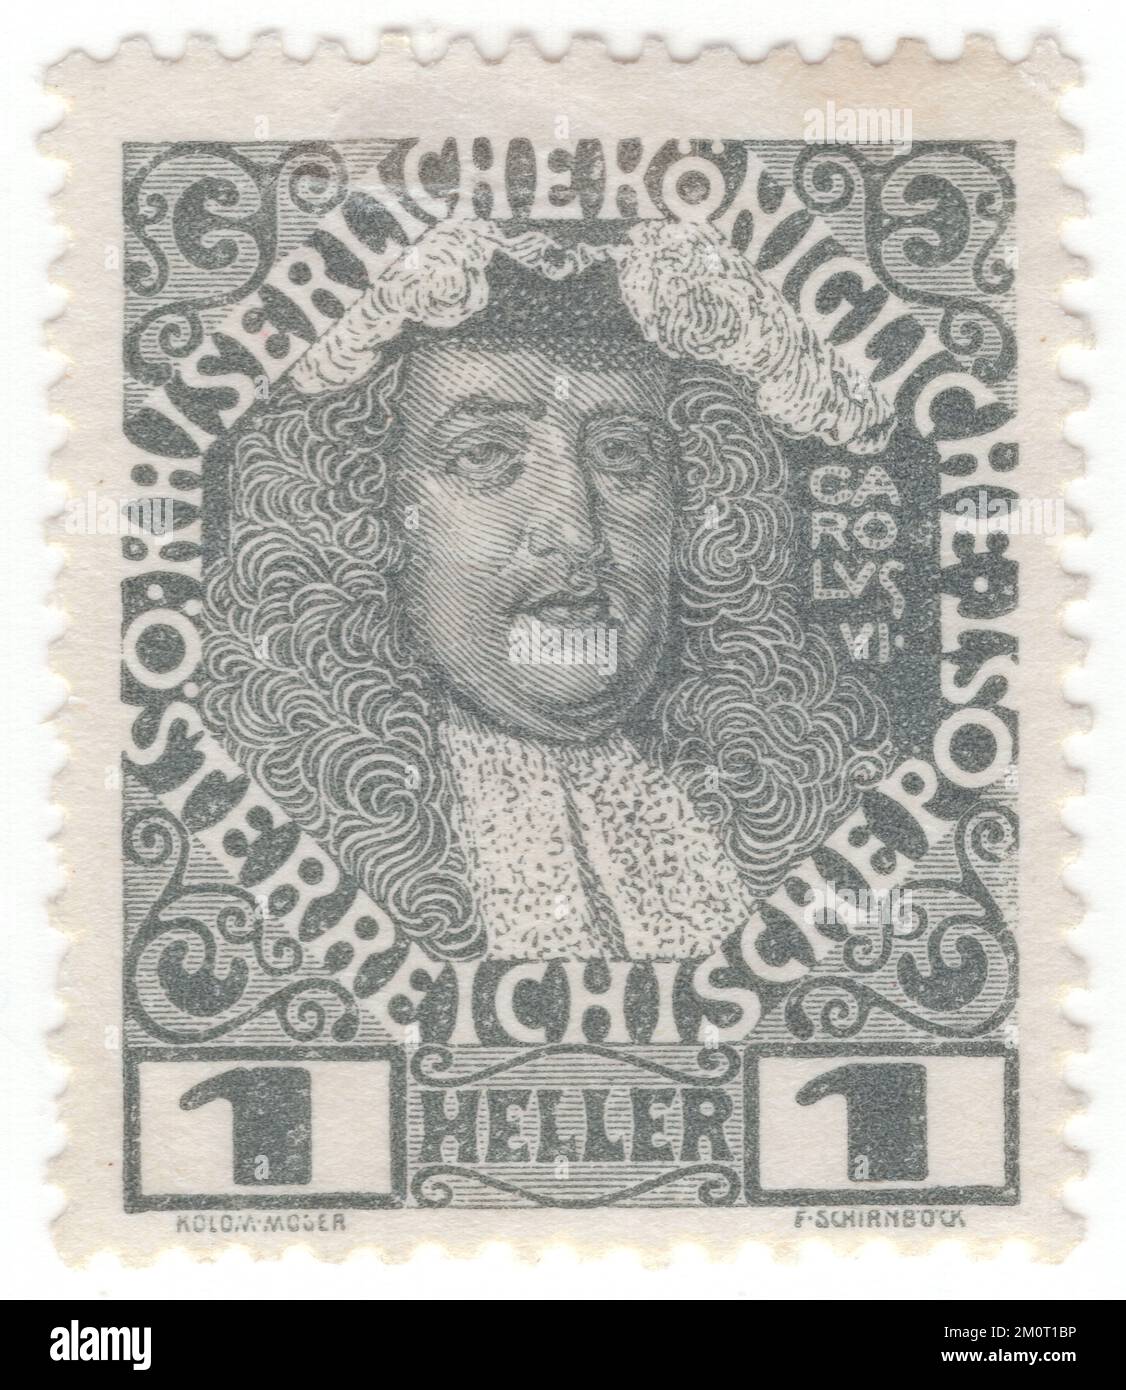 AUSTRIA — 1908: An 1 heller grey-black postage stamp depicting portrait of Karl VI. Definitive set issued for the 60th year of the reign of Austrian Monarch Franz Josef, Emperor of Austria, King of Hungary, and the other states of the Habsburg monarchy. Charles VI was Holy Roman Emperor and ruler of the Austrian Habsburg monarchy from 1711 until his death, succeeding his elder brother, Joseph I. He unsuccessfully claimed the throne of Spain following the death of his relative, Charles II. In 1708, he married Elisabeth Christine of Brunswick-Wolfenbüttel, by whom he had his four children Stock Photo